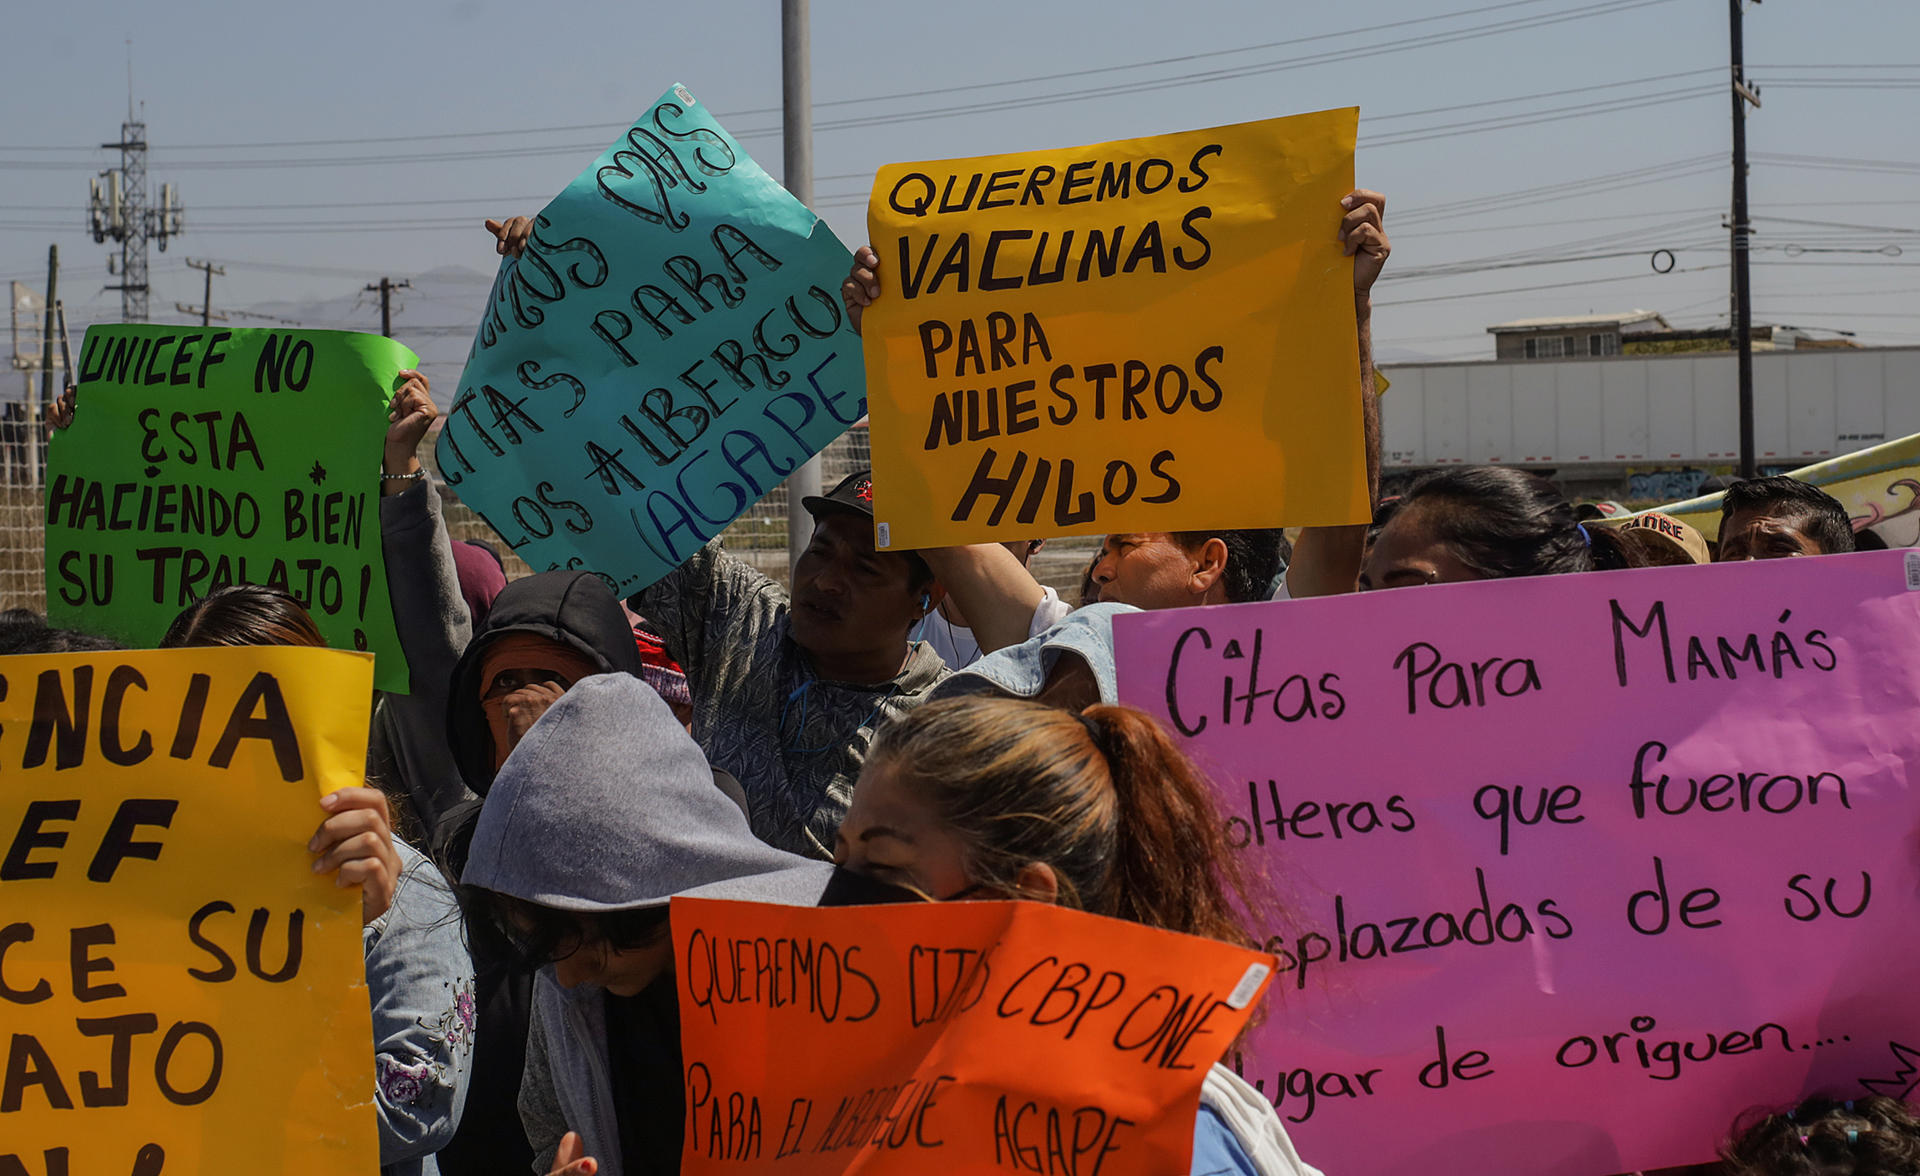 Migrants protest the lack of vaccinations and medical care outside the US Consulate in Tijuana, Mexico, August 24, 2023. EFE/ Joebeth Terríquez